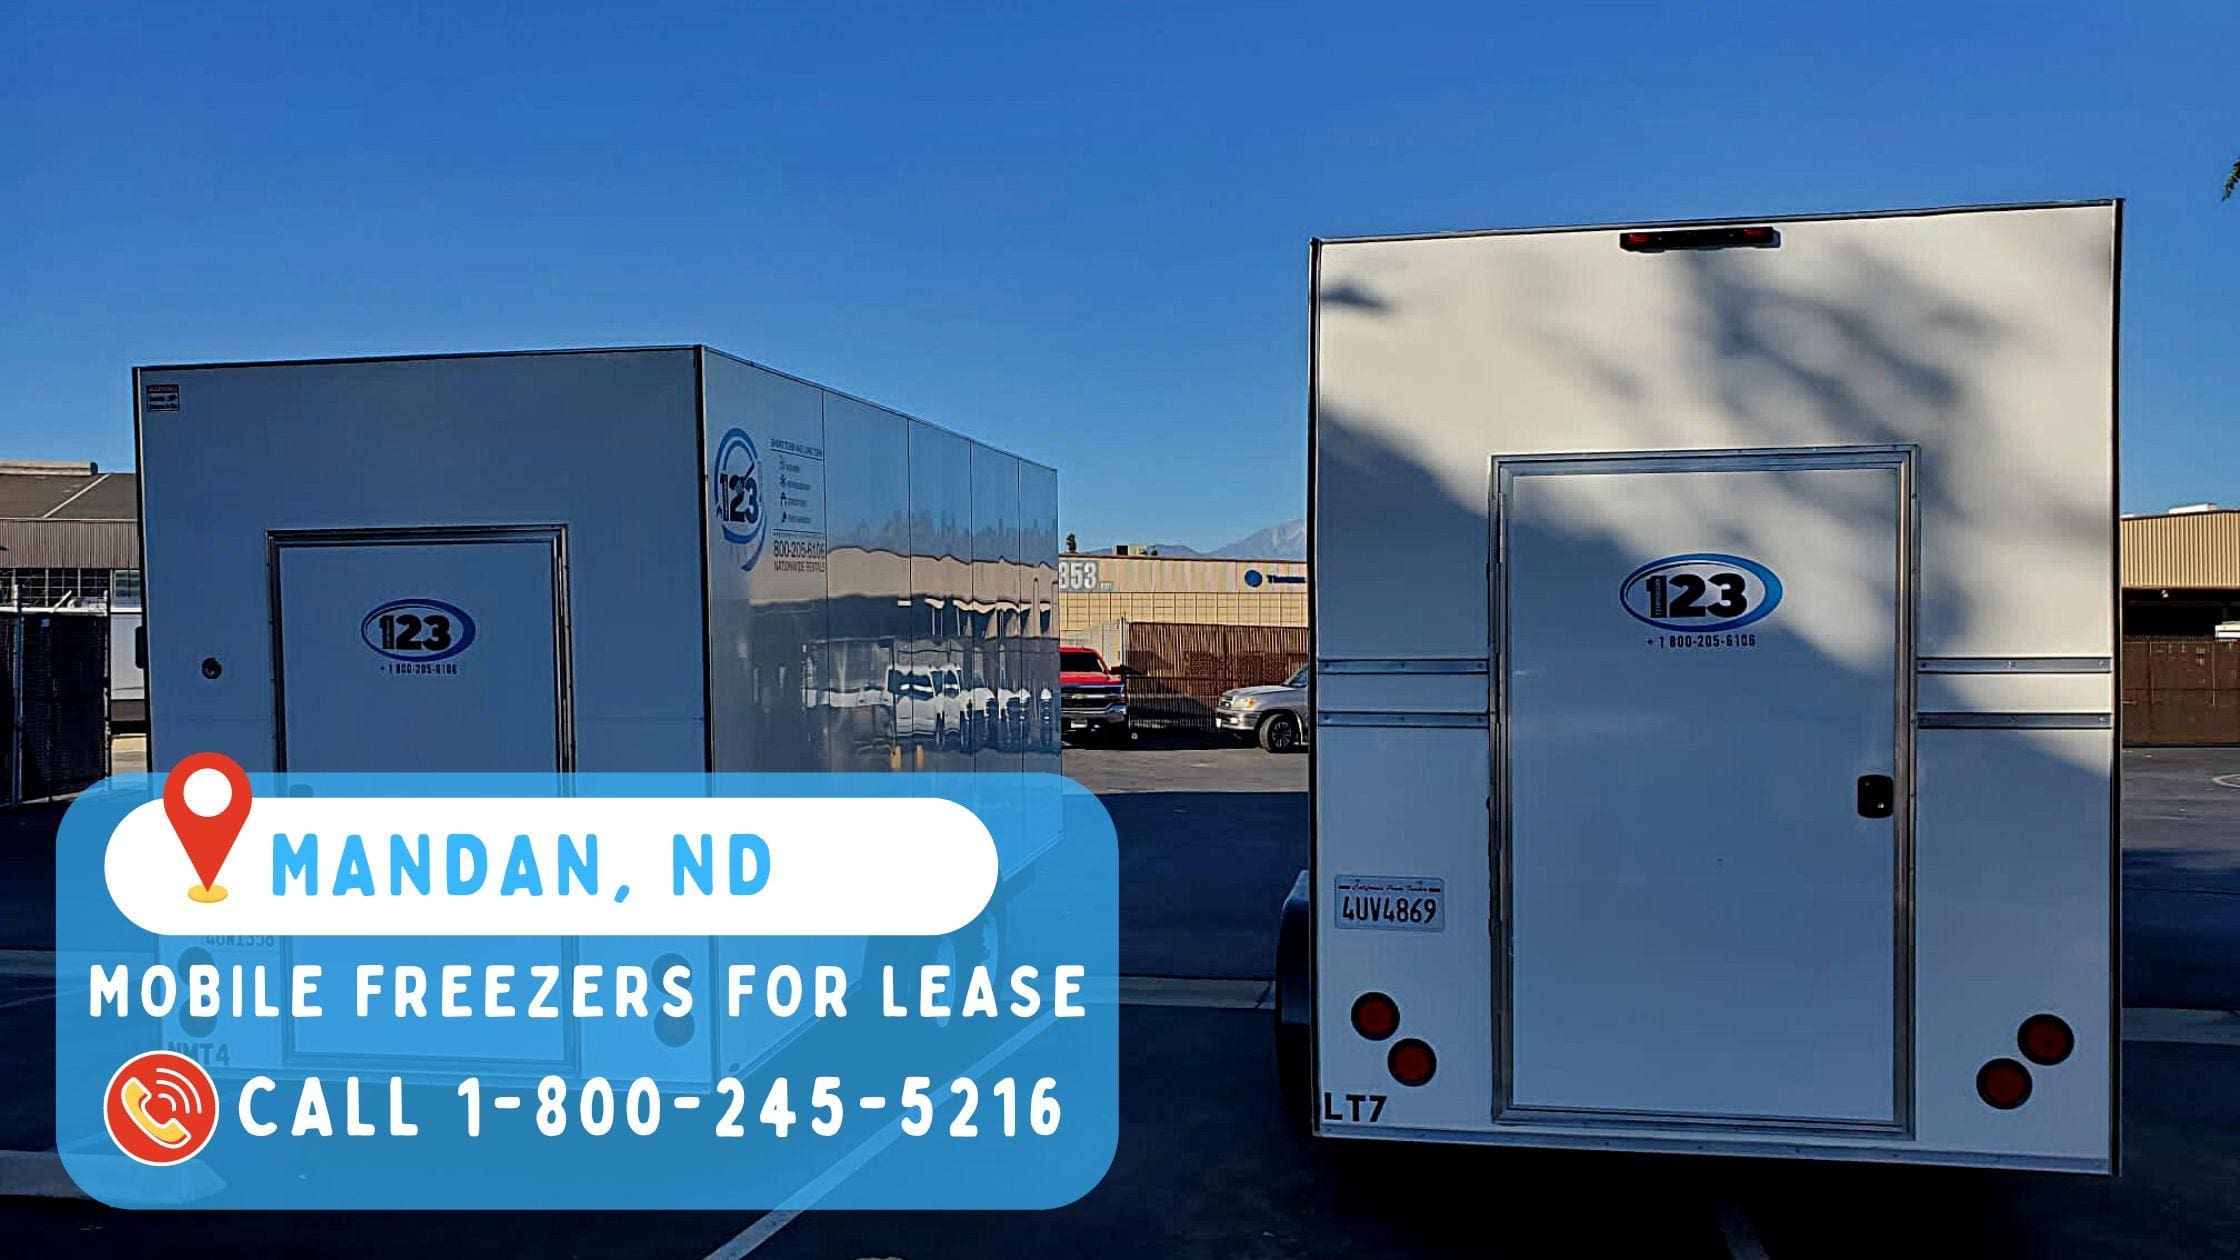 Mobile Freezers for Lease in Mandan